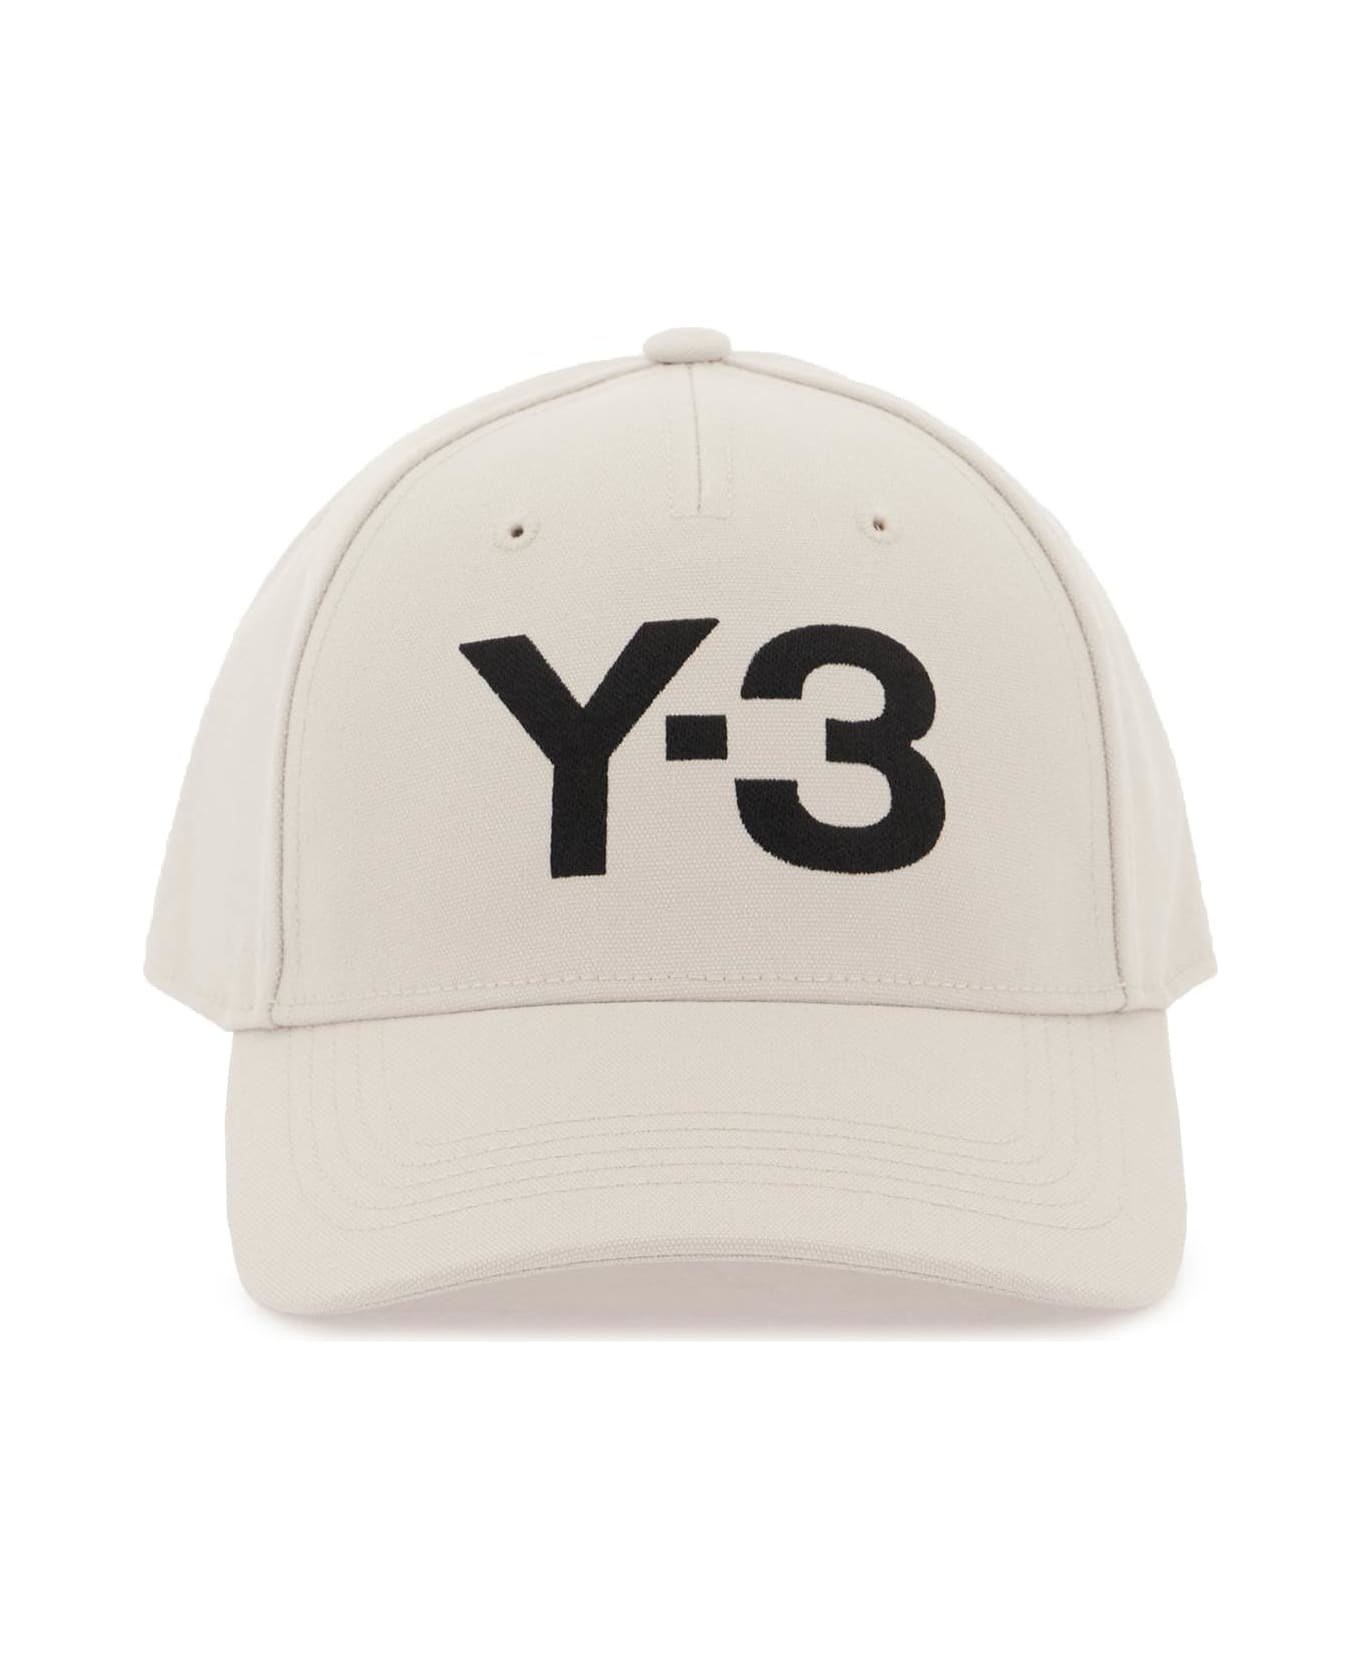 Y-3 Baseball Cap With Embroidered Logo - White